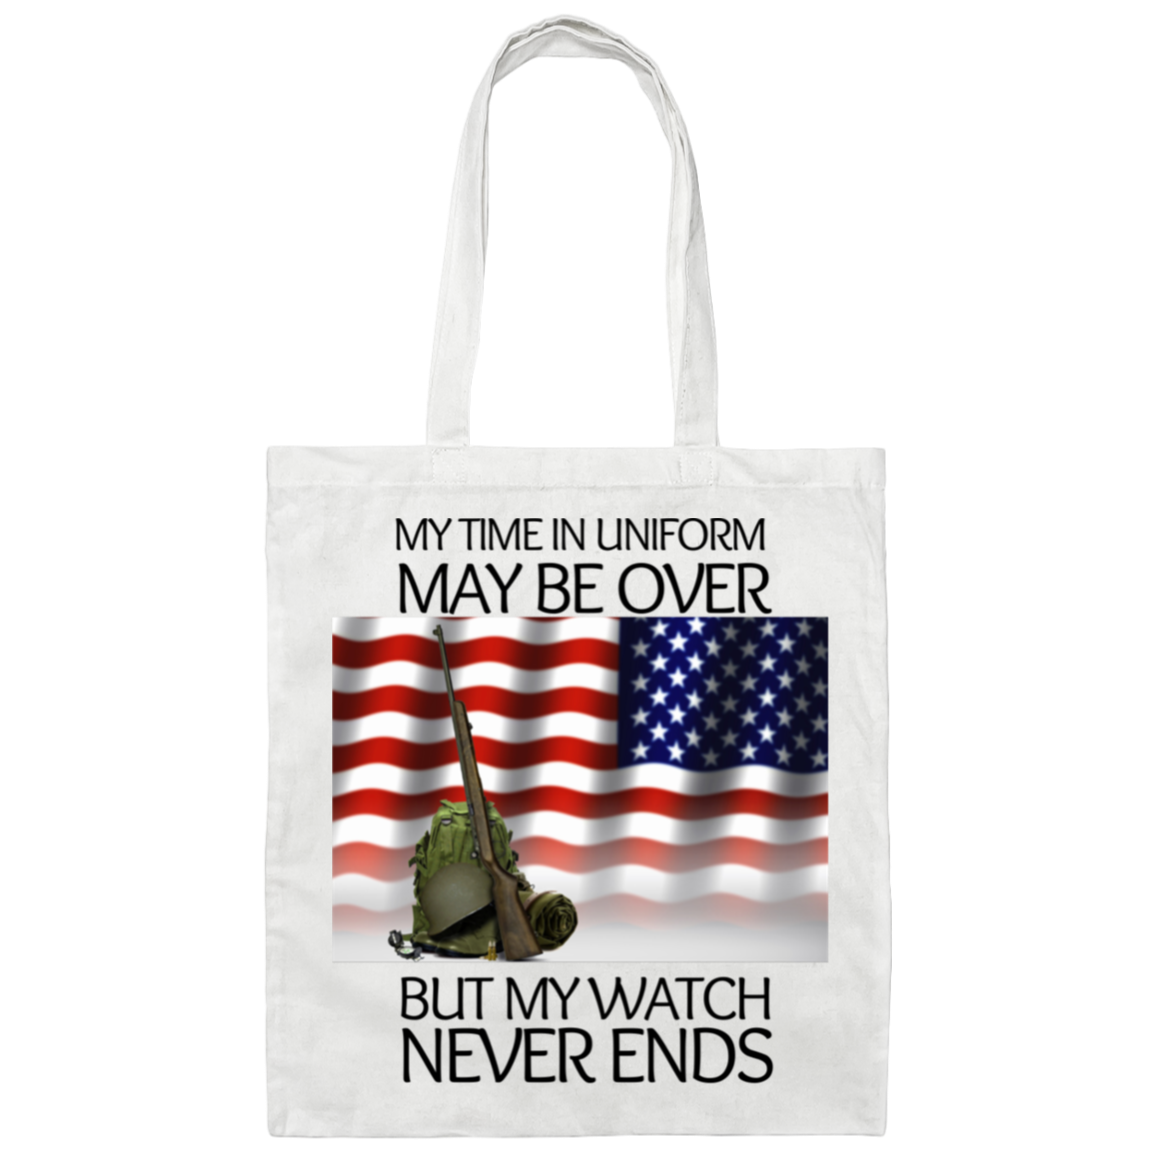 My Time In Uniform may be over but my watch never ends- Cotton Canvas Bag-Tote